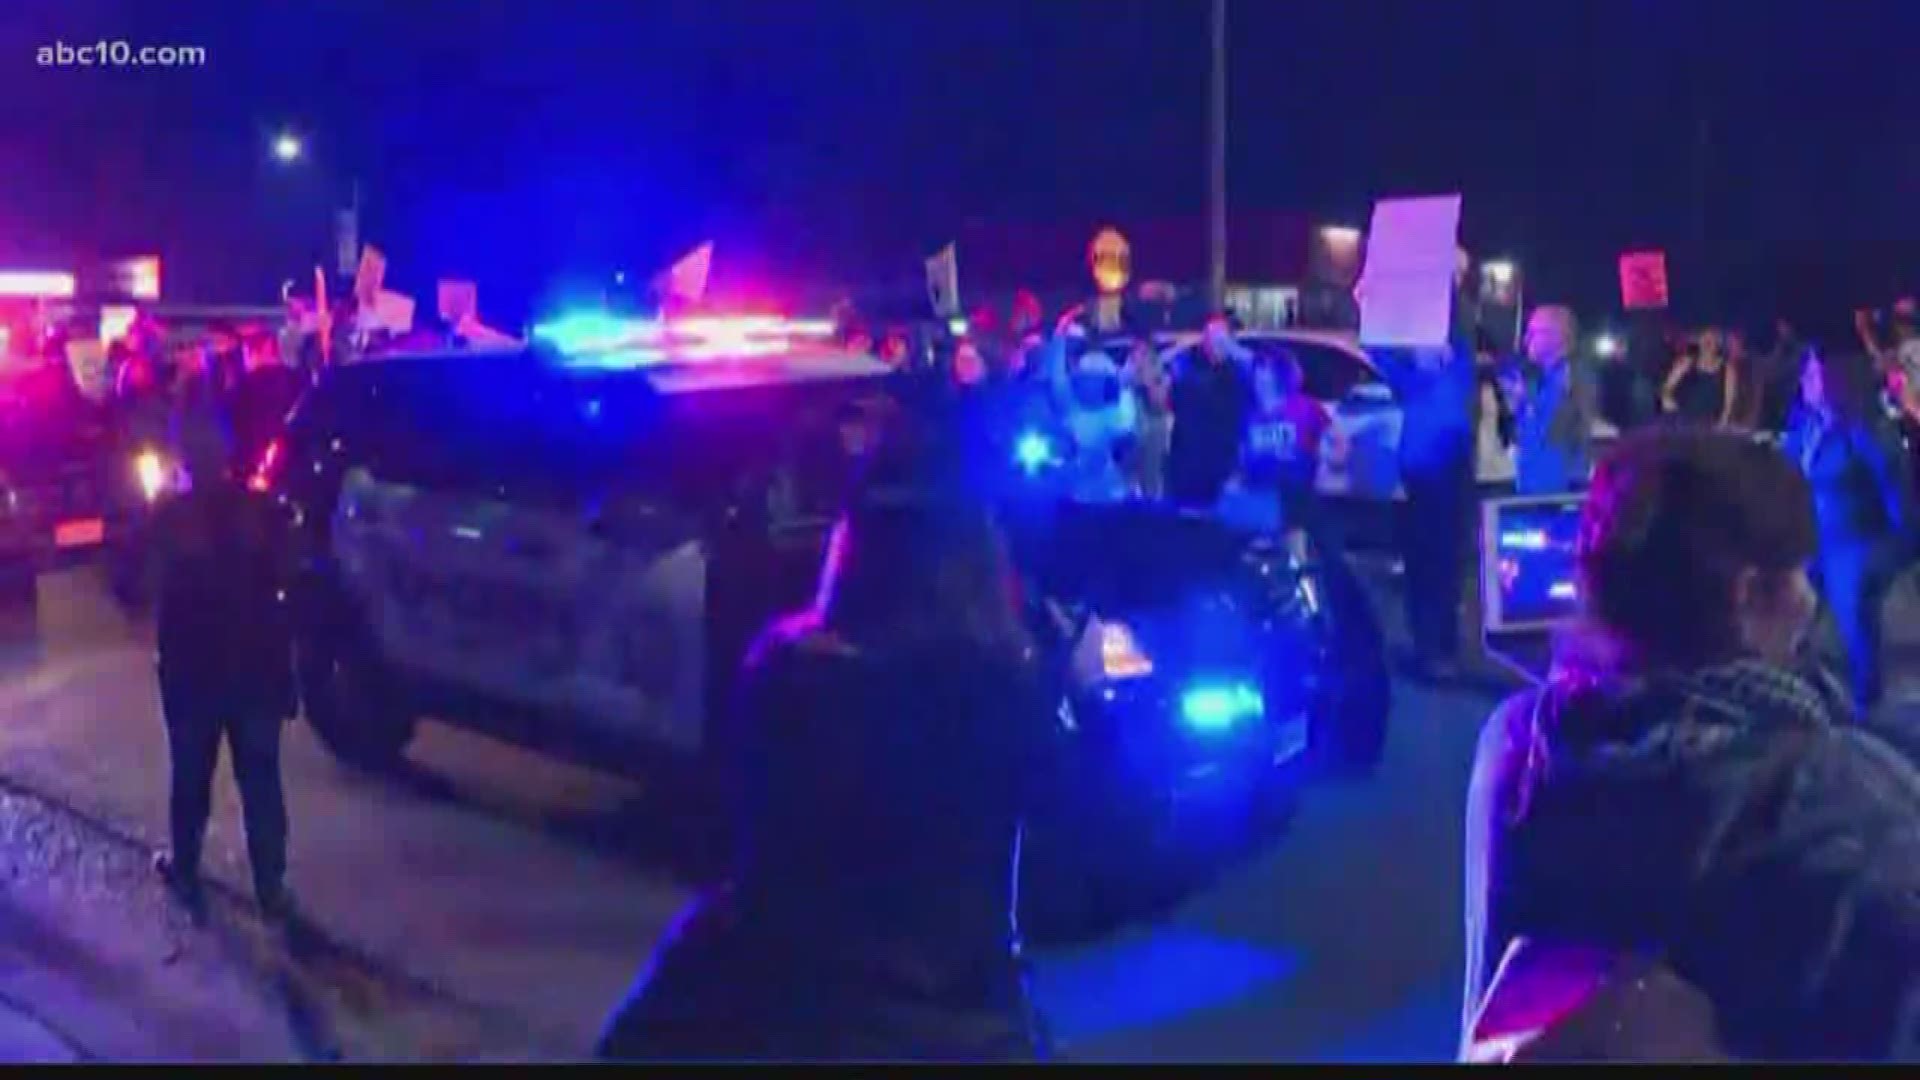 A Sacramento County Sheriff's deputy SUV hit a person after a vigil for Stephon Clark. The person was taken away by an ambulance.